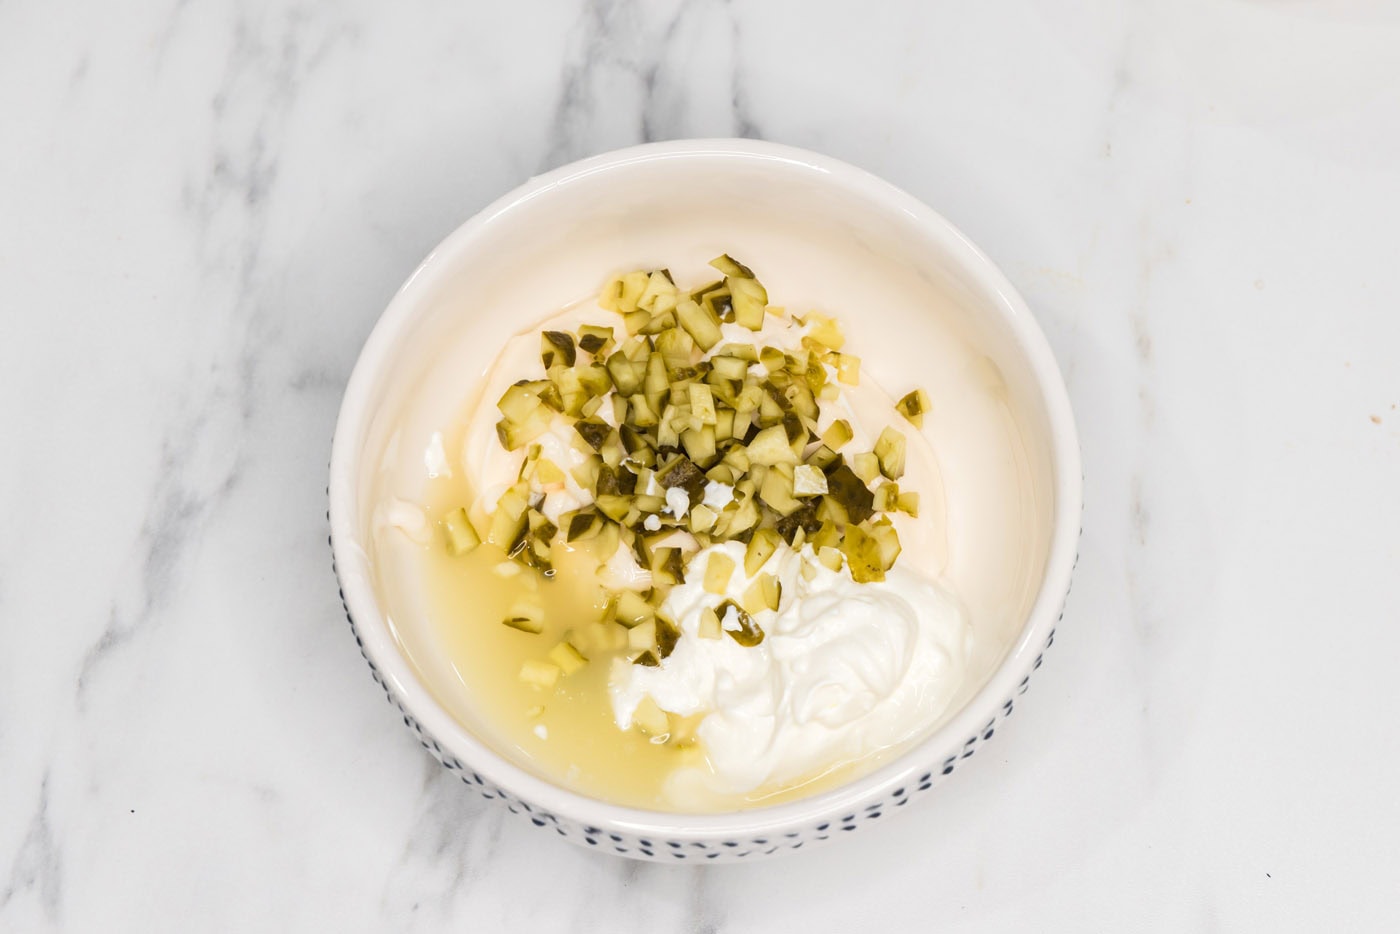 diced pickles, mayo, sour cream, and lemon juice in a bowl